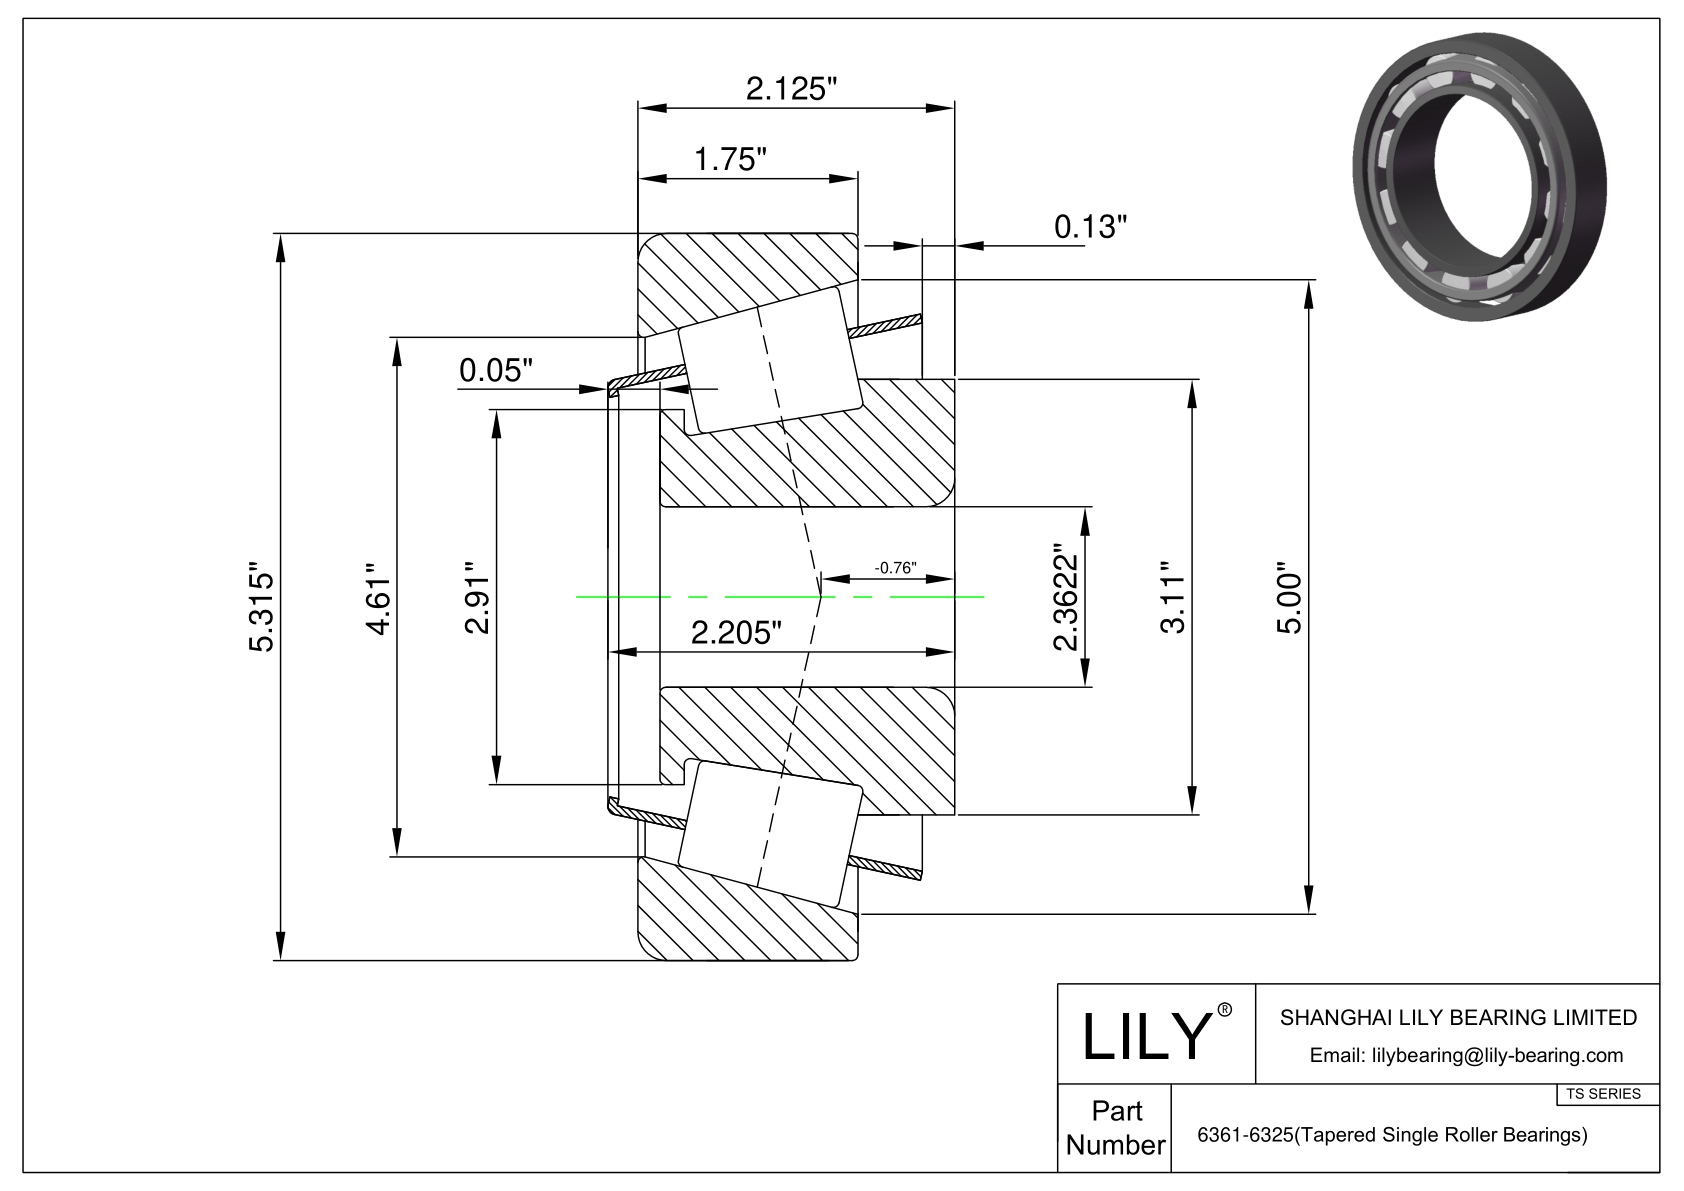 6361-6325 TS (Tapered Single Roller Bearings) (Imperial) cad drawing